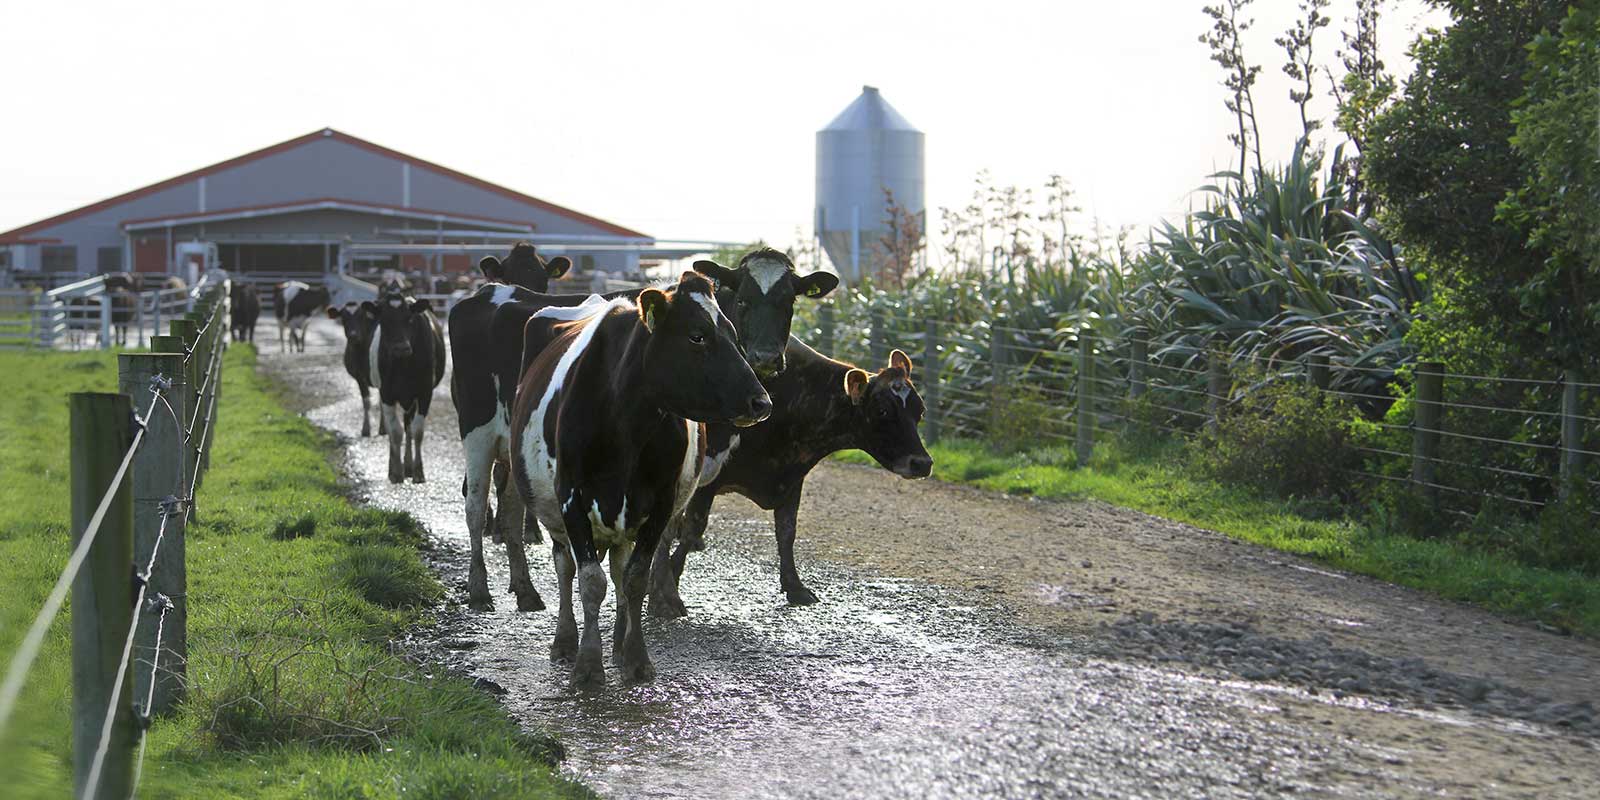 Frisian dairy cows after milking